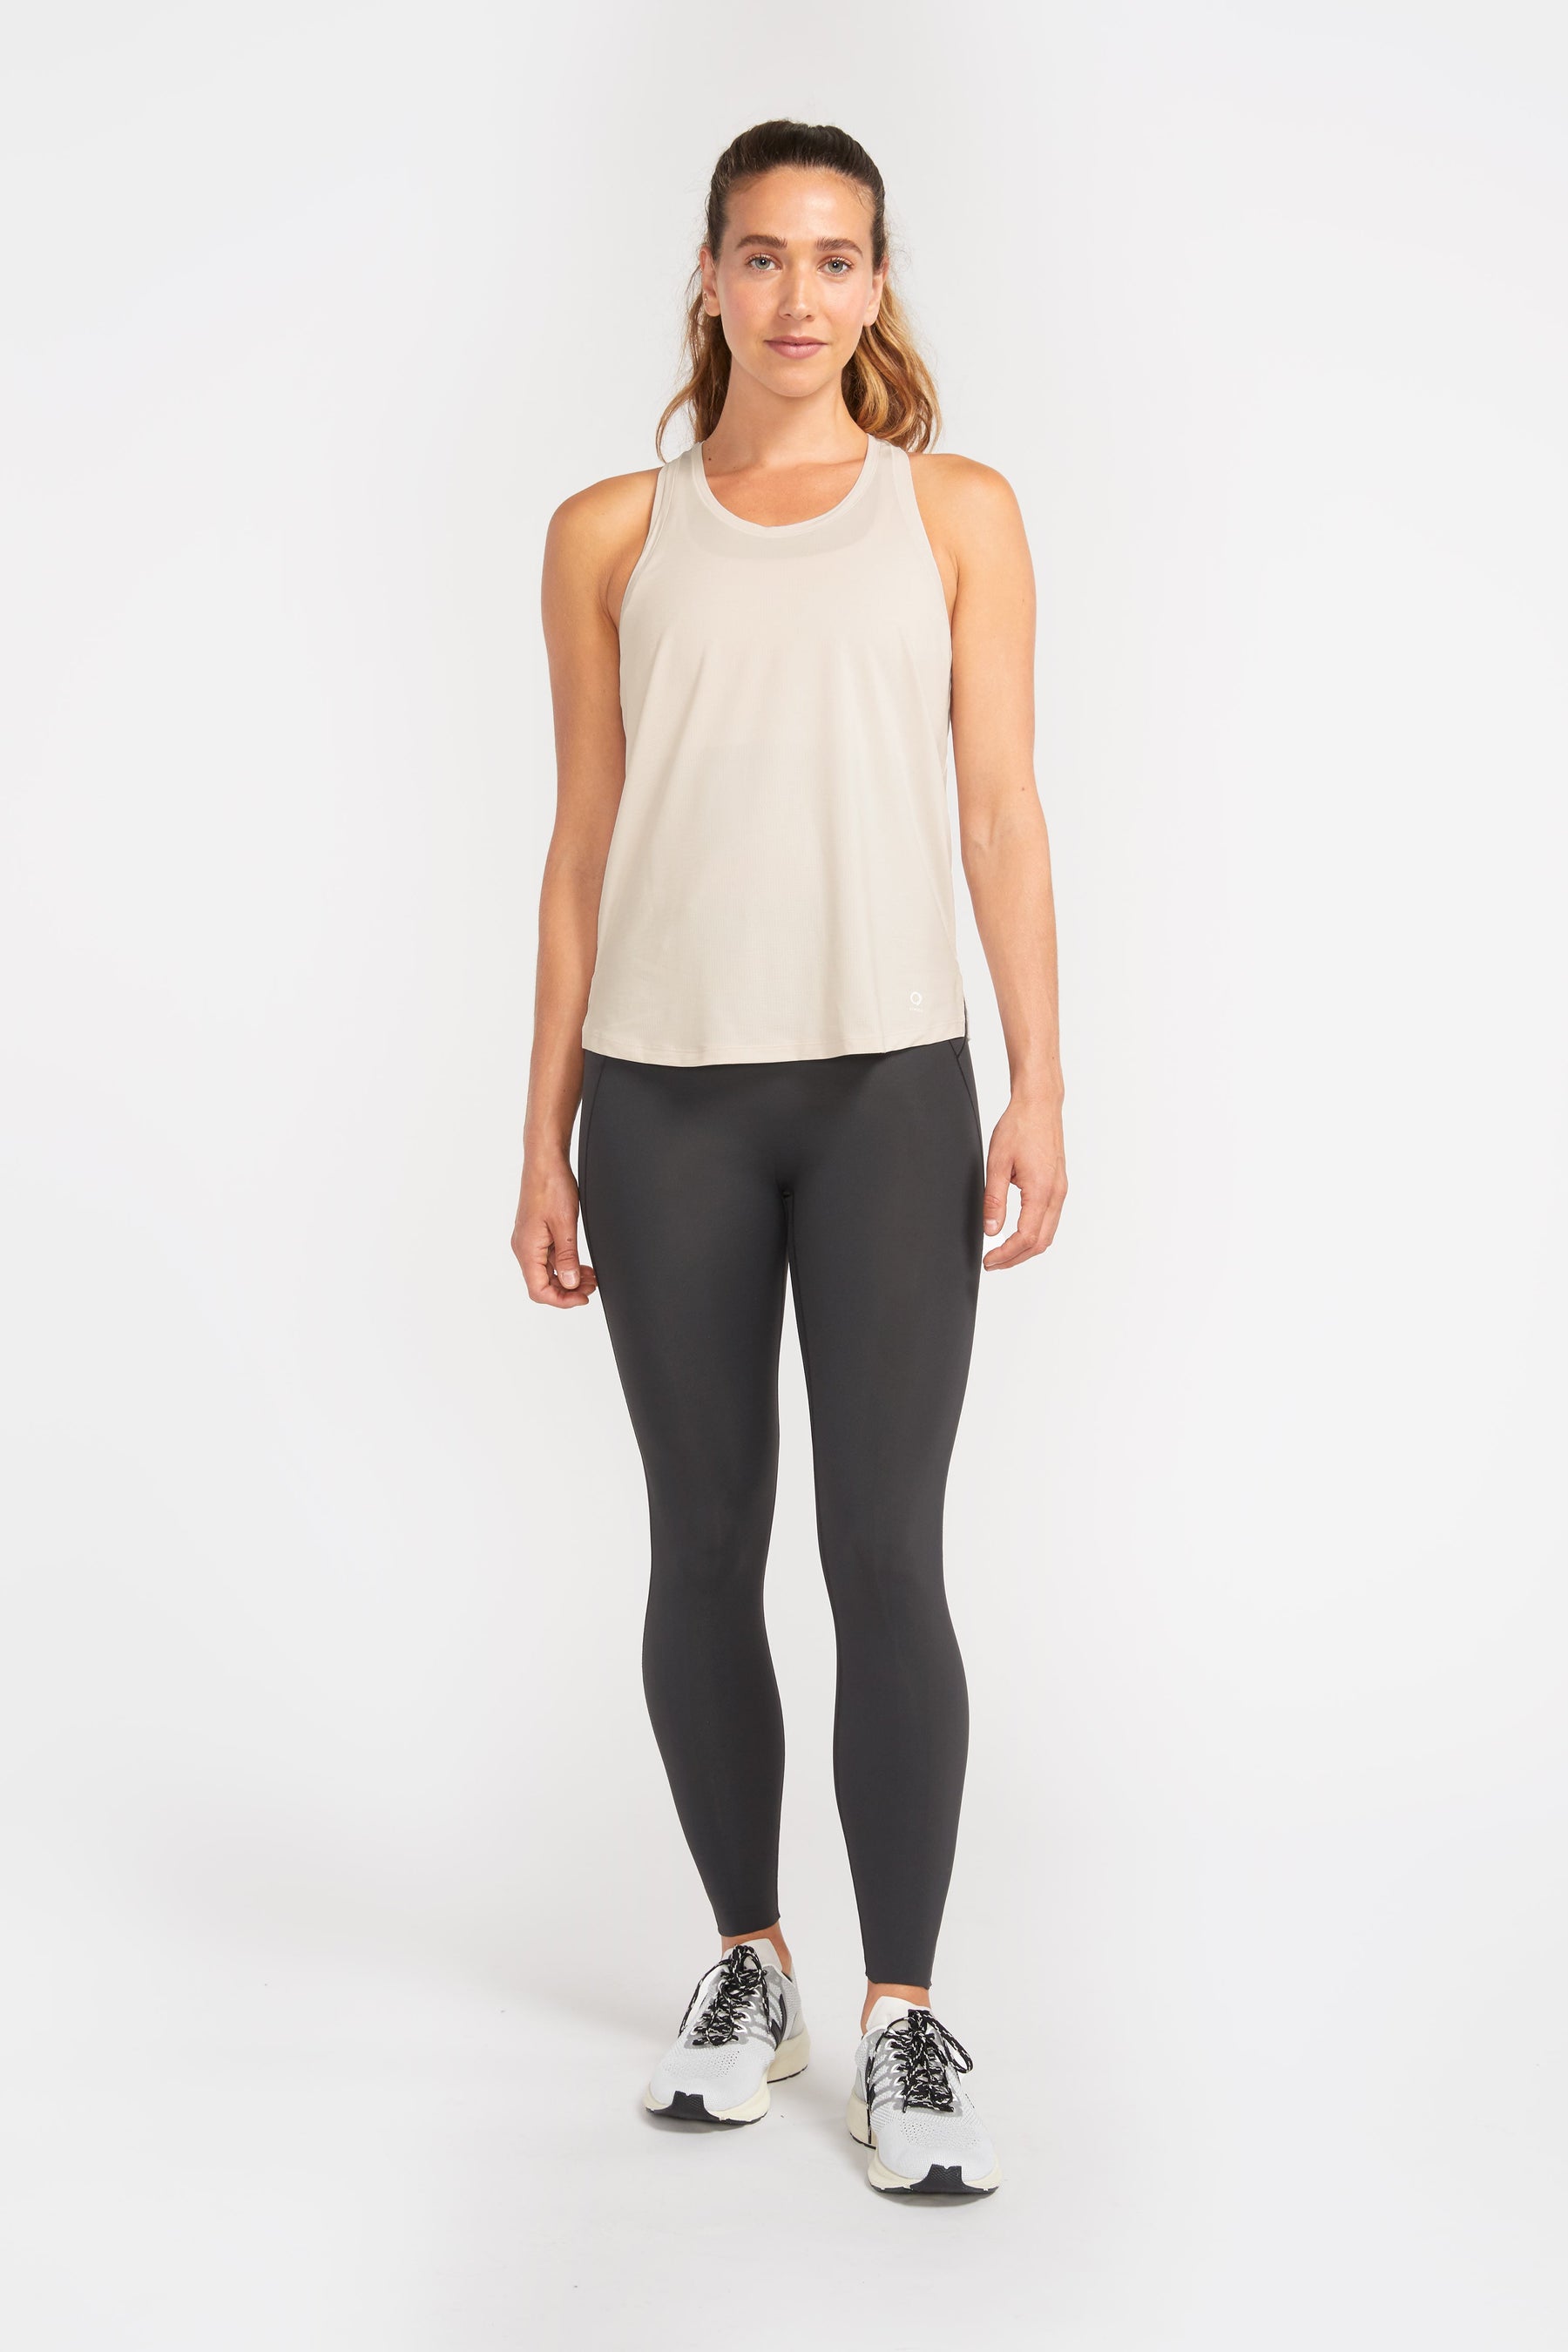 Mesh fitness tank top in natural color white sand, lululemon dupe